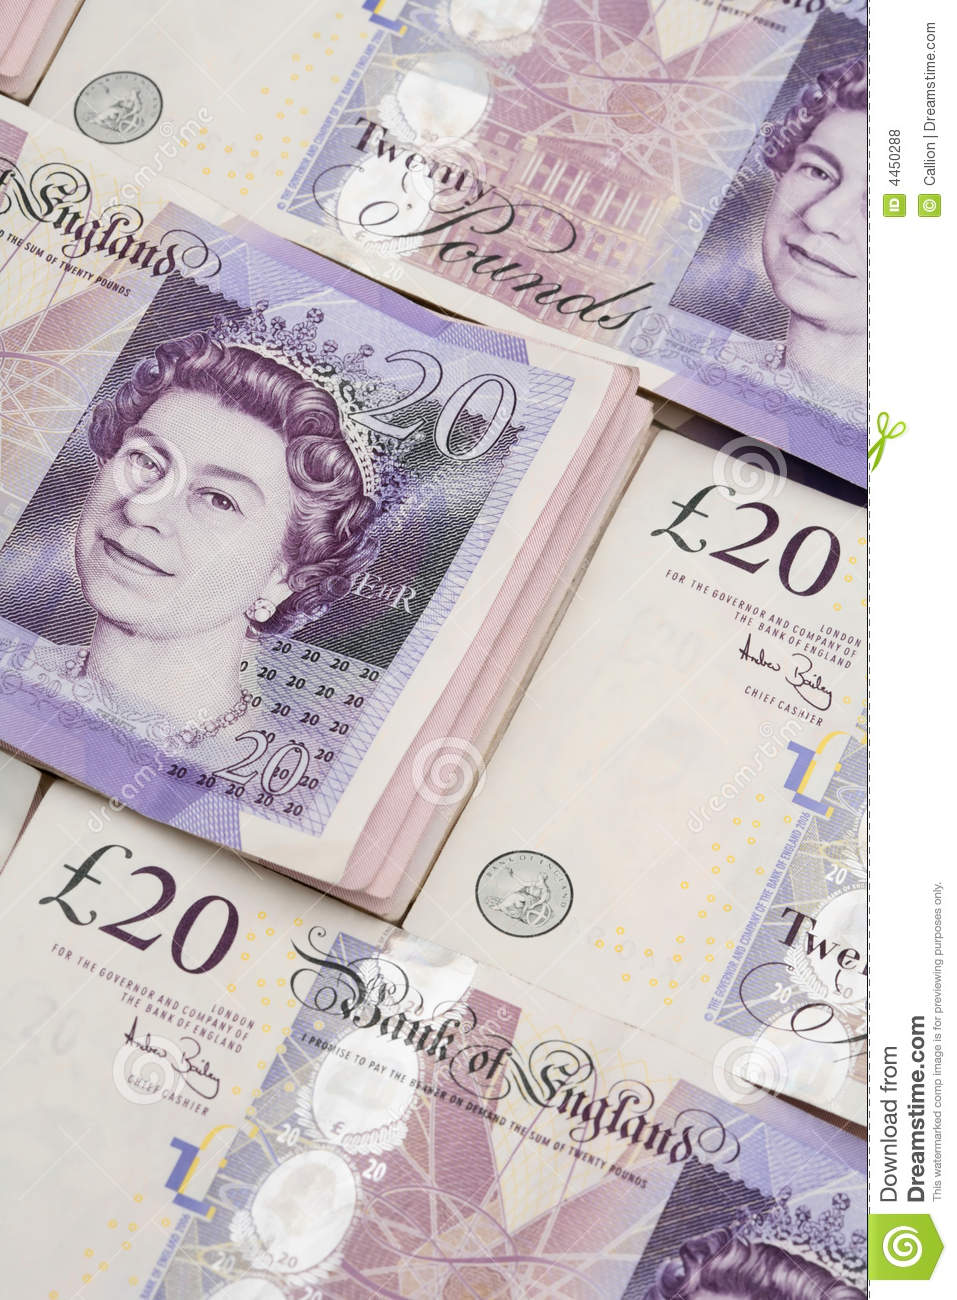 British Bank Notes Pounds Sterling Royalty Free Stock Photos   Image    